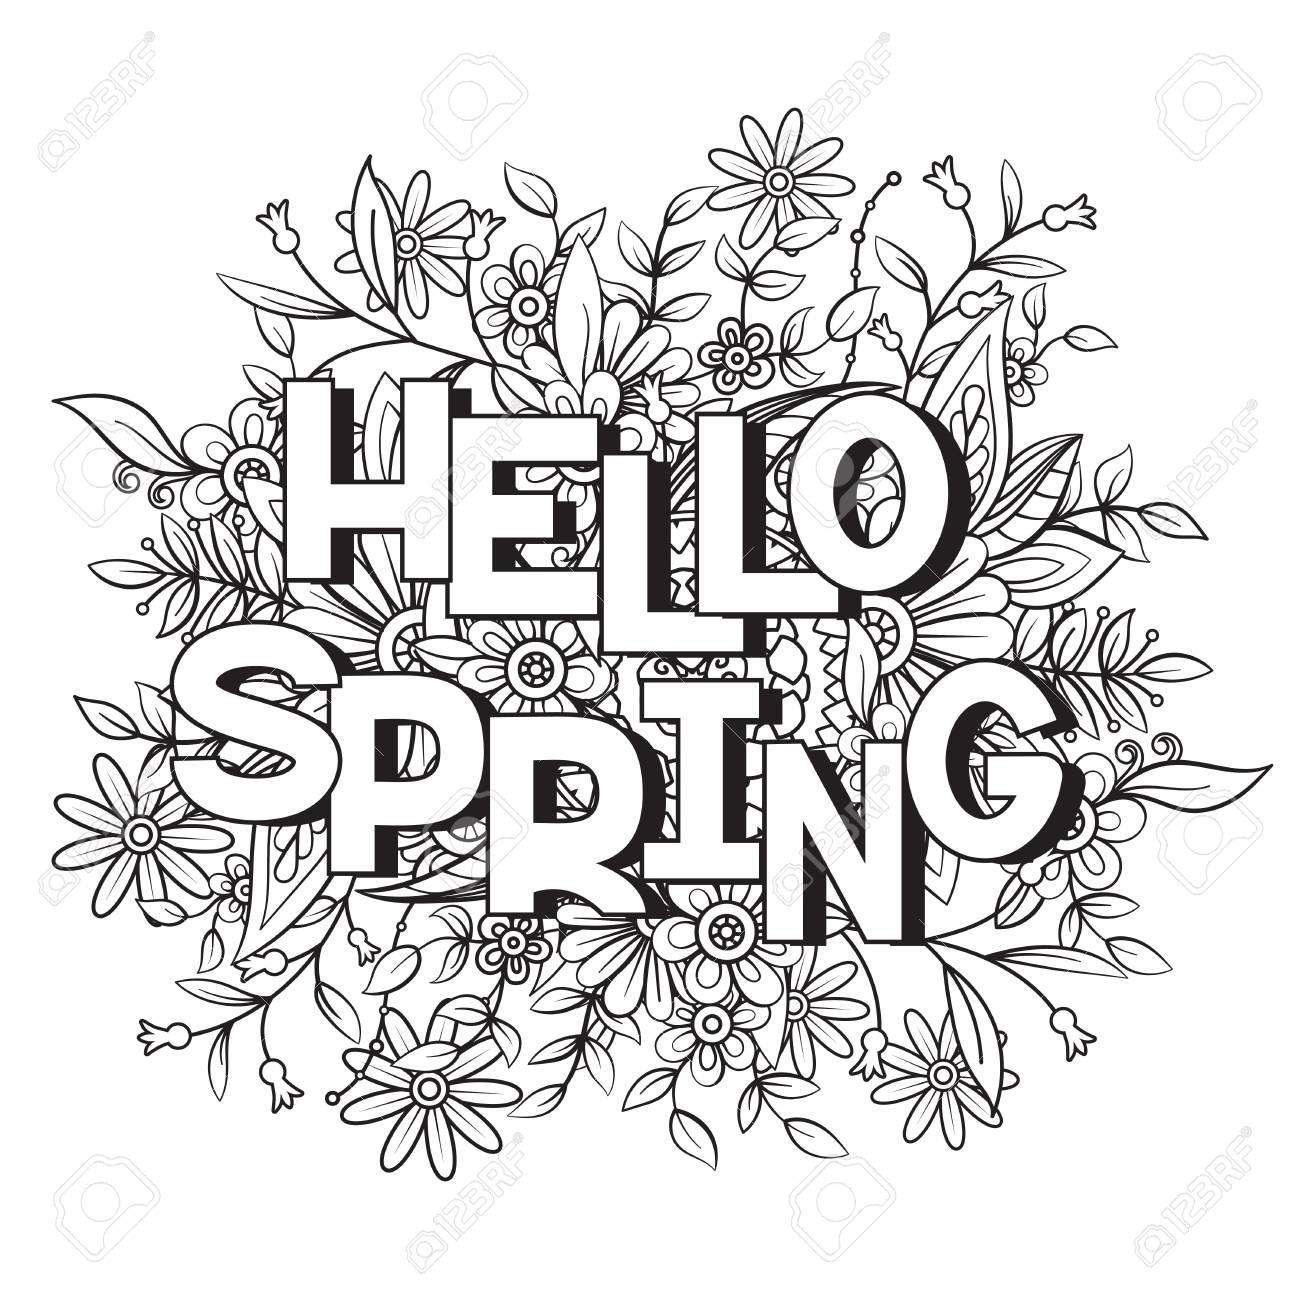 Hello spring coloring page with beautiful flowers black and white vector illustration greeting card template isolated on white background royalty free svg cliparts vectors and stock illustration image